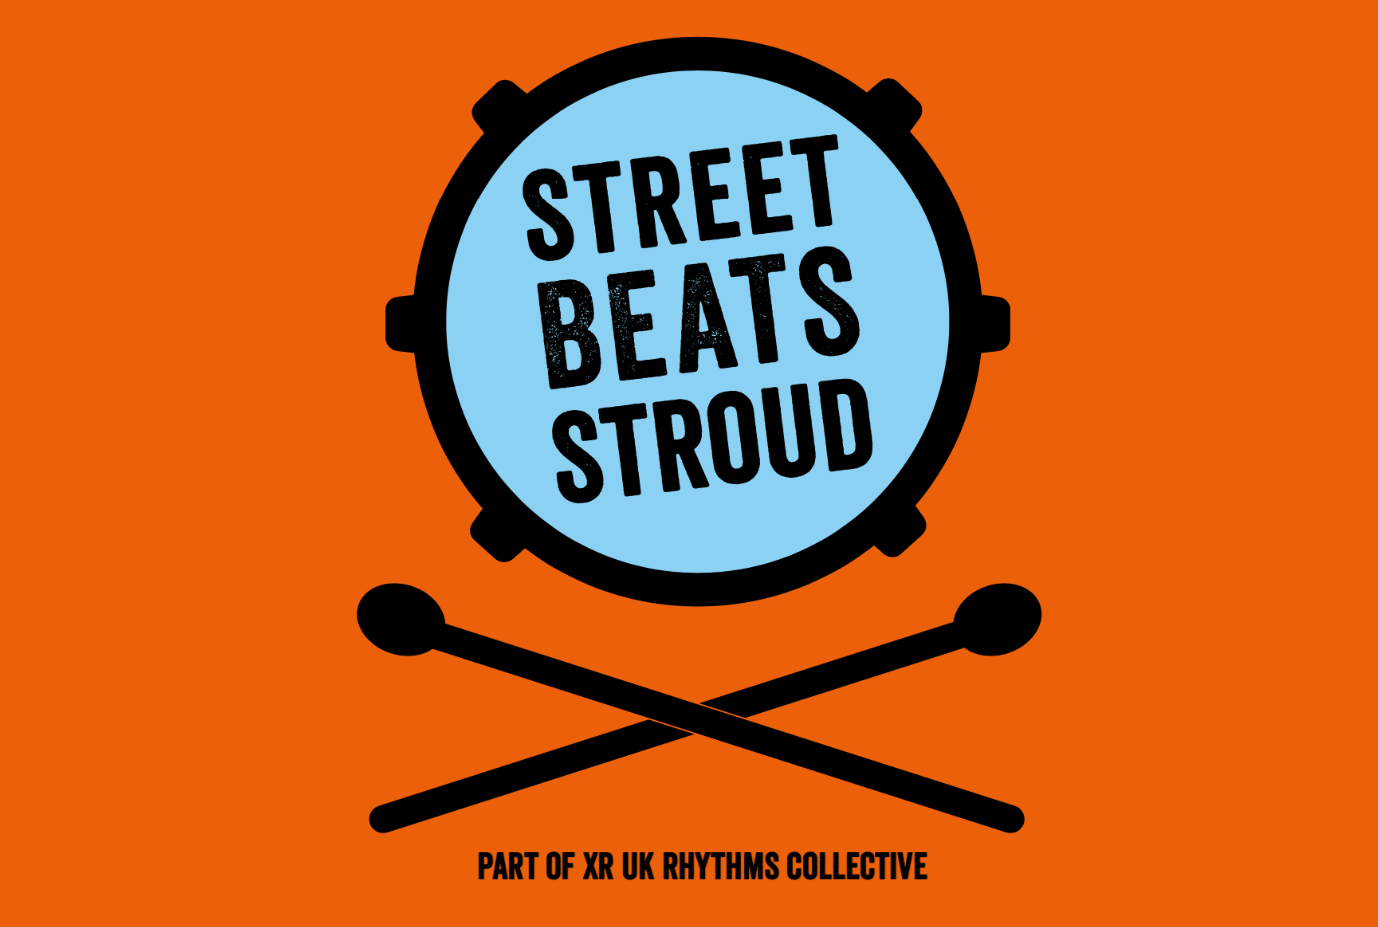 Street Beats Stroud - part of the XR Rhythms Collective